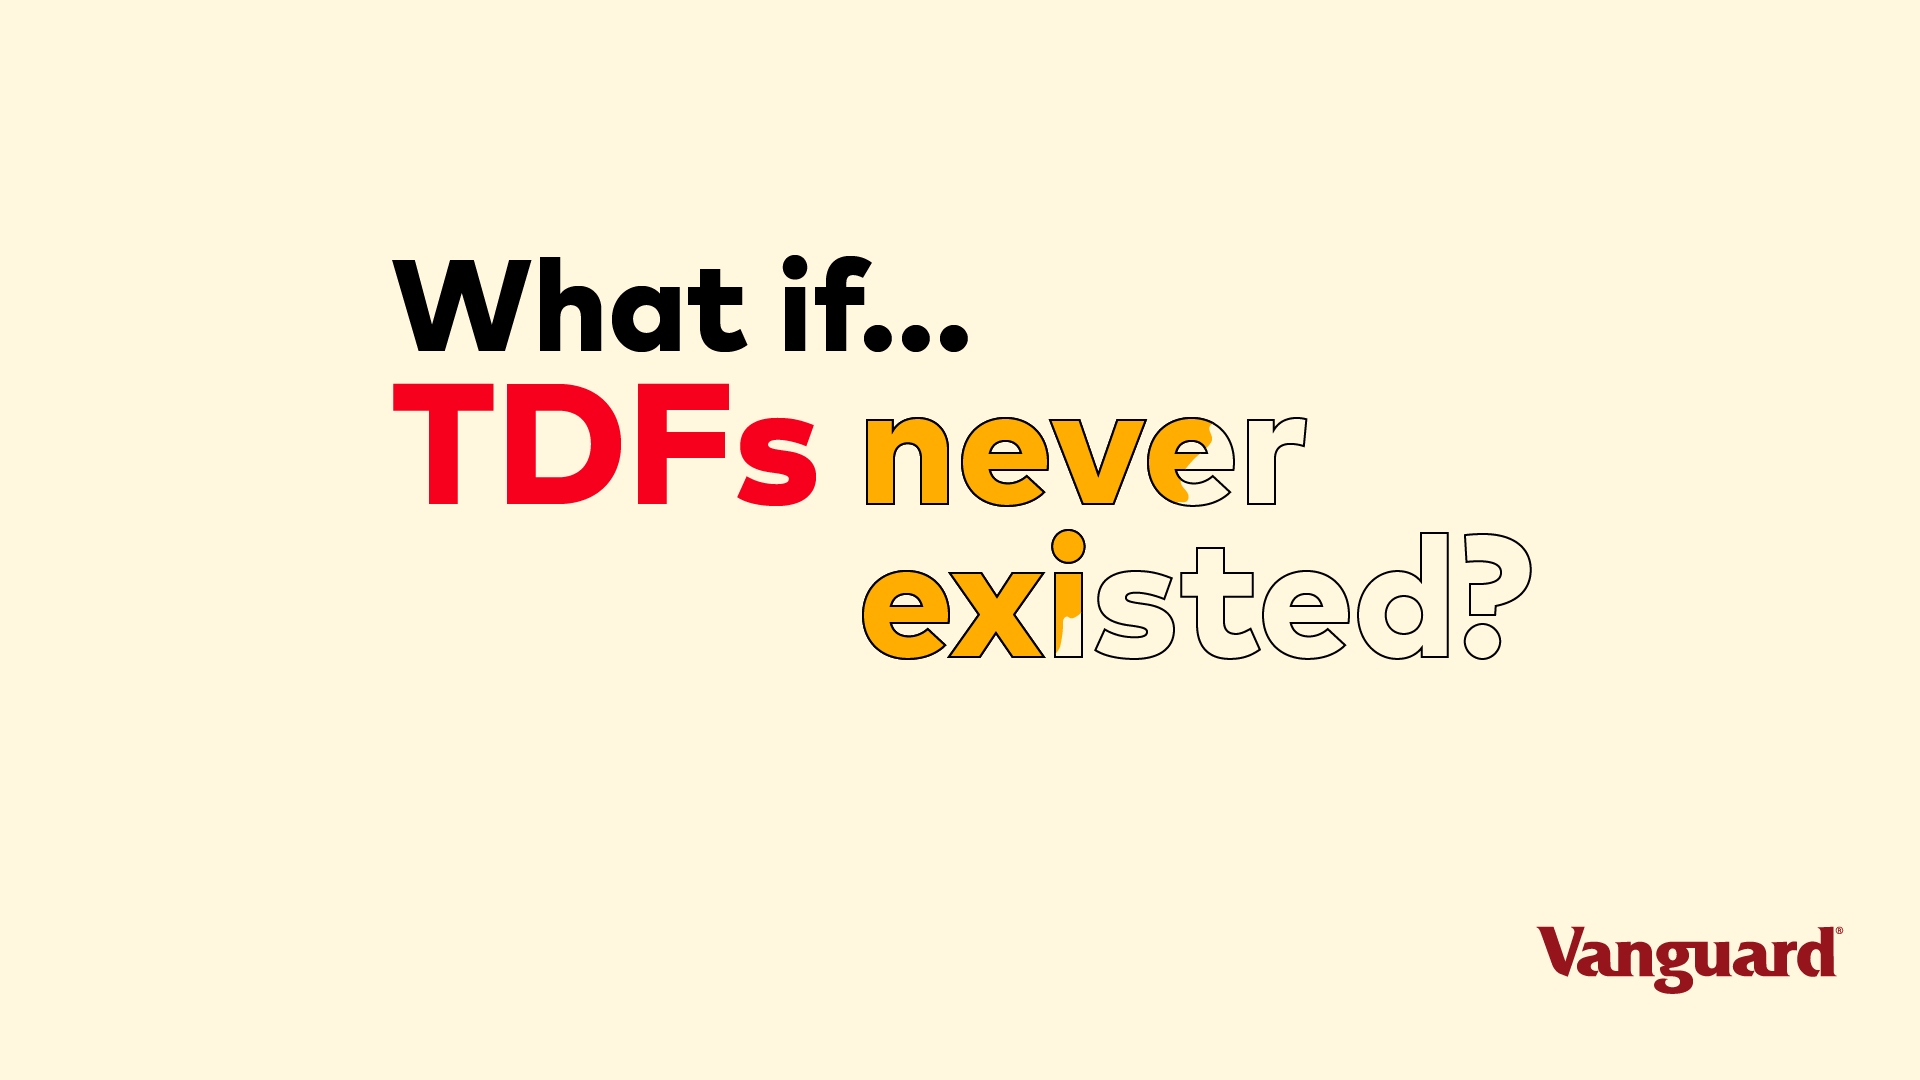 What if TFDs never existed?